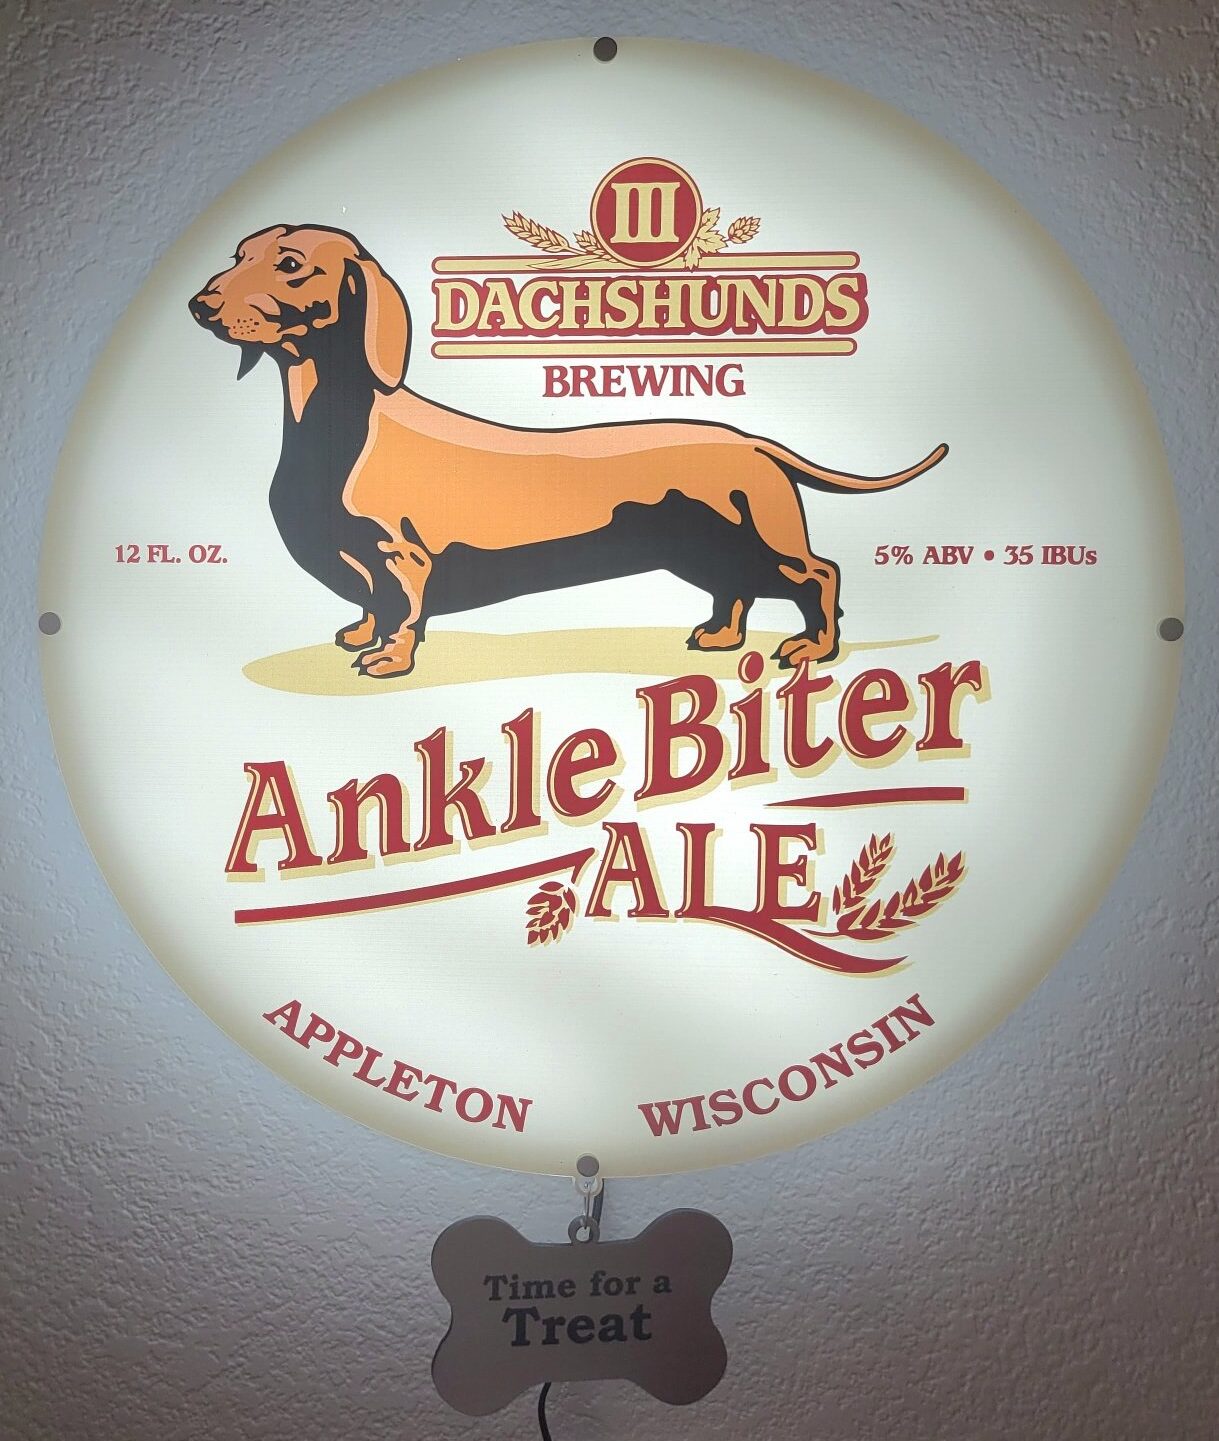 Ankle Biter Ale LED Illuminated Sign - III Dachshunds Brewing